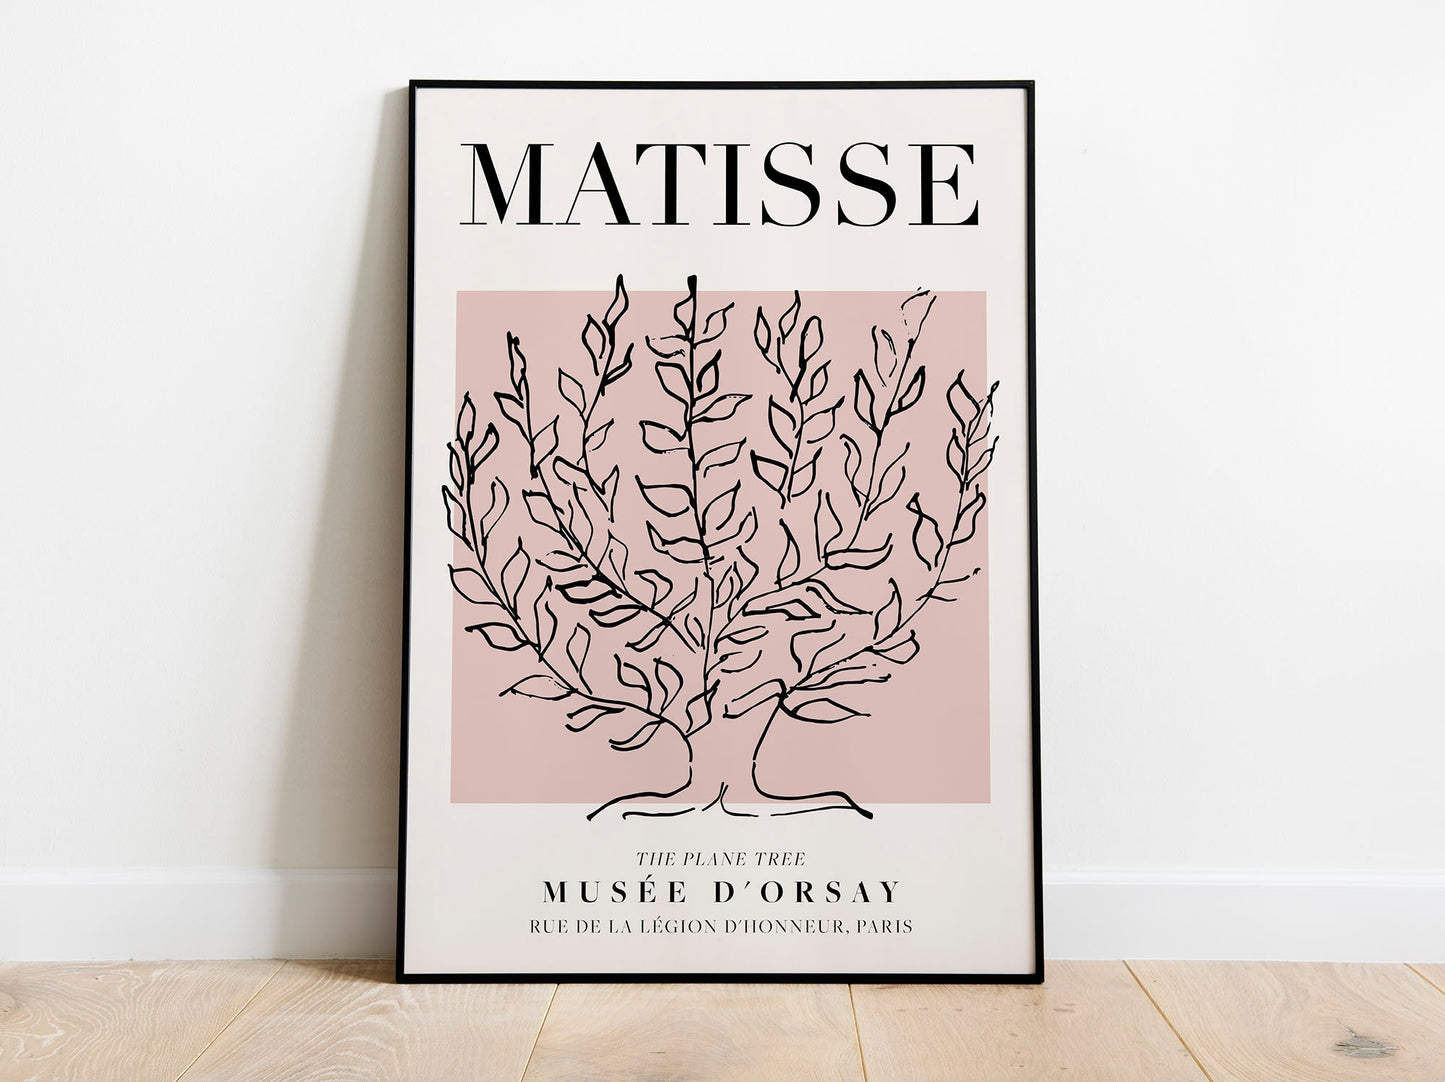 Henri Matisse - Plane Tree, Exhibition Vintage Line Art Poster, Minimalist Line Drawing Wall Art, Ideal Home Decor or Gift Print